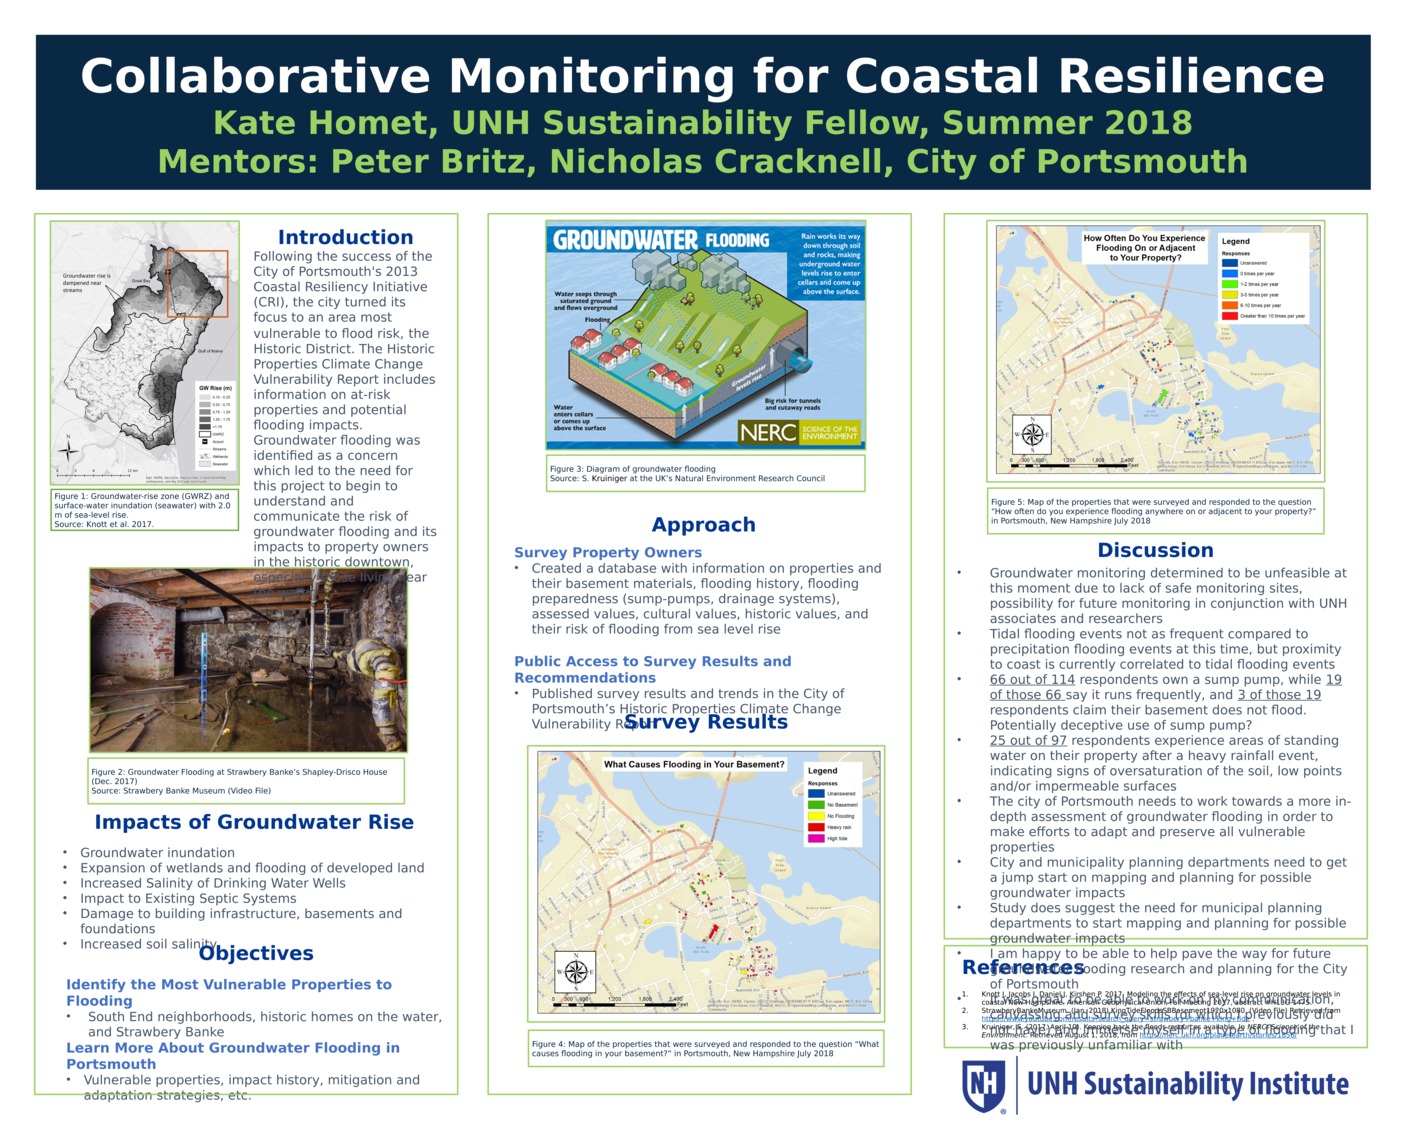 Collaborative Monitoring For Coastal Resilience by KateHomet